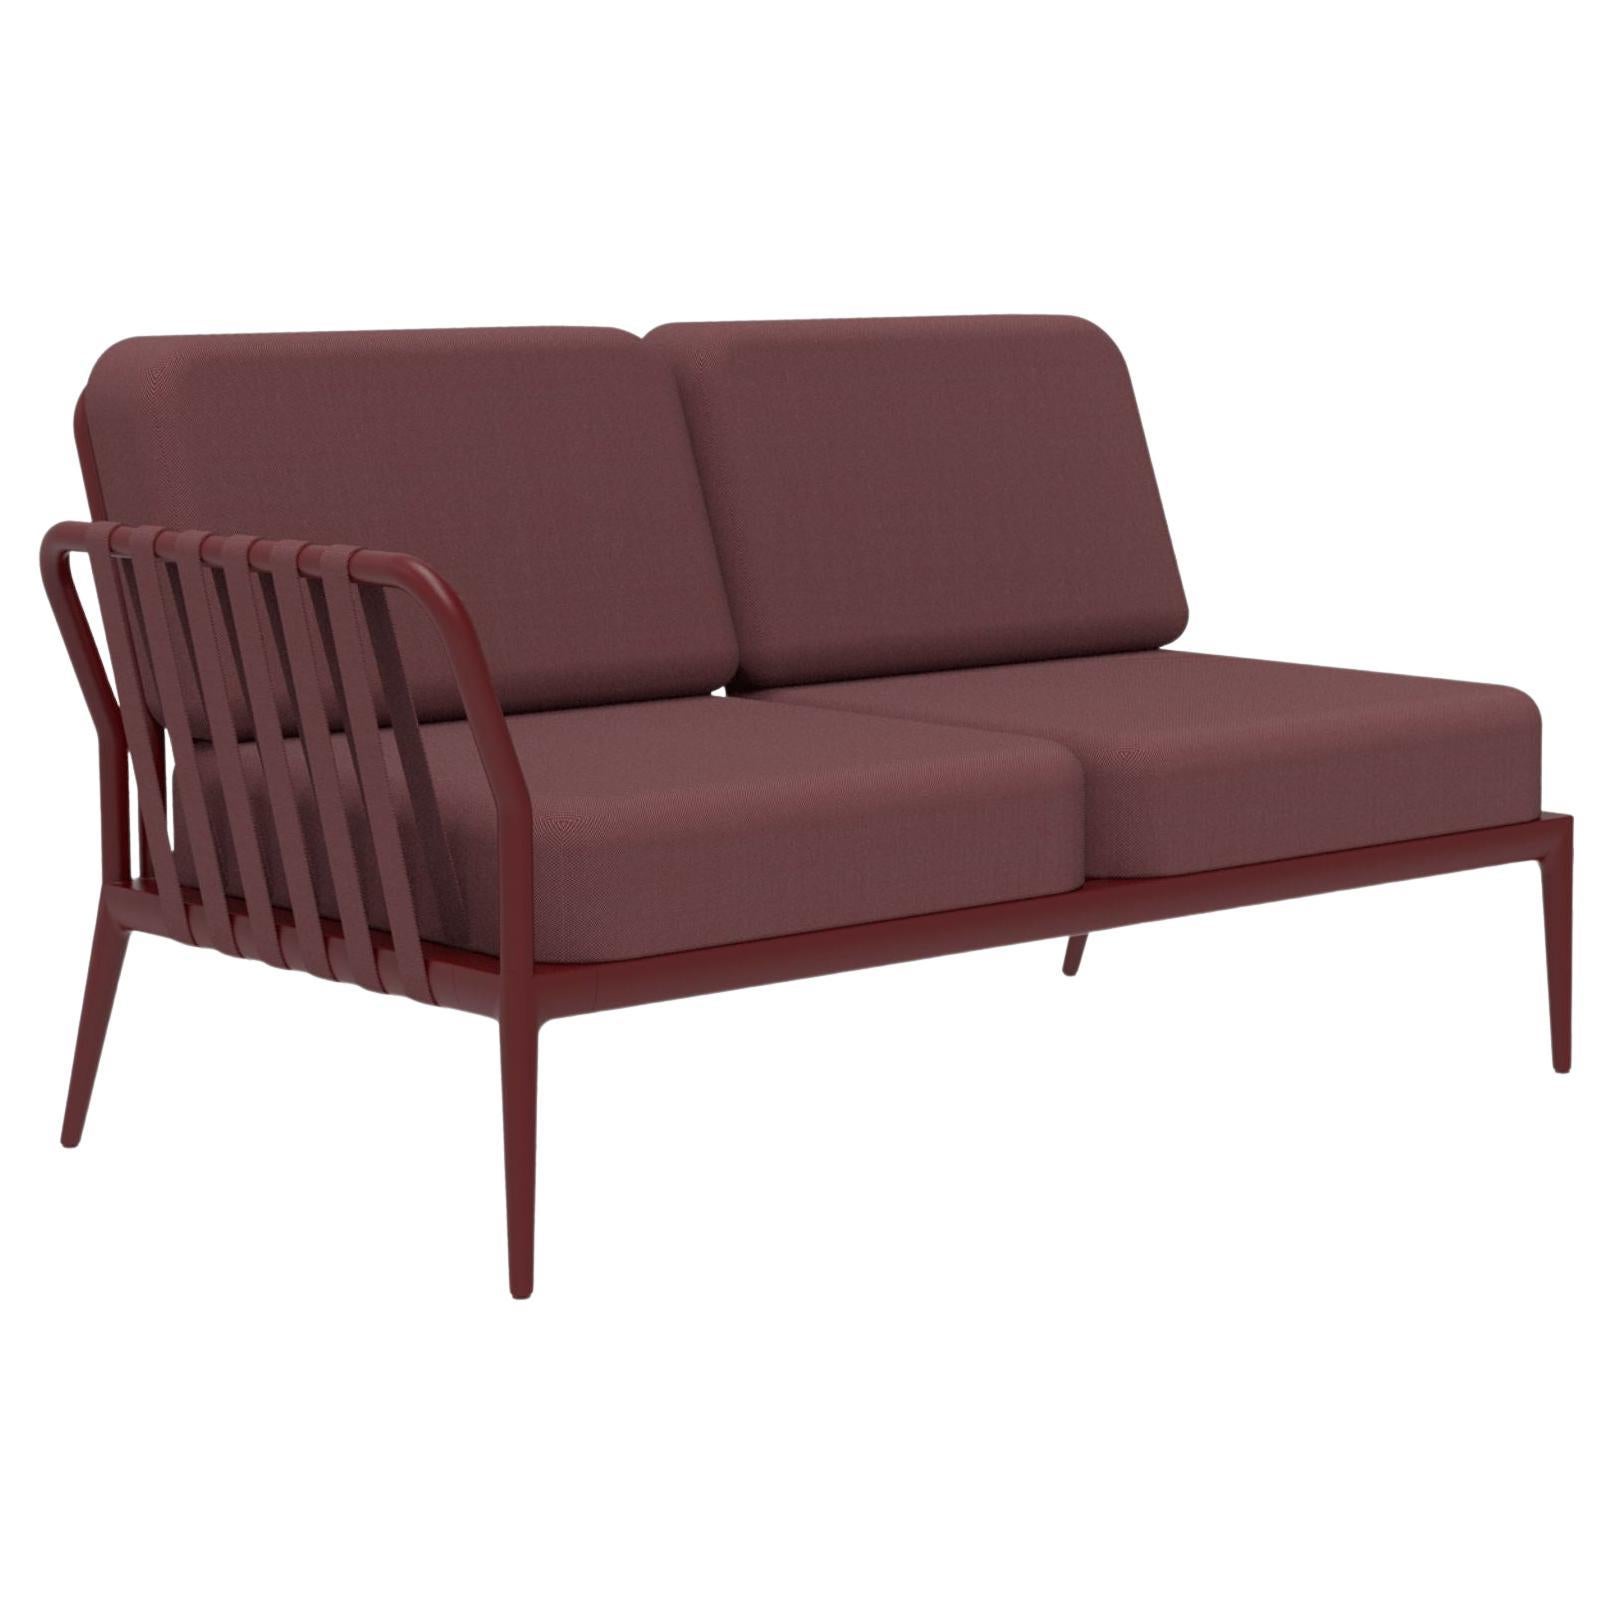 Ribbons Burgundy Double Right Modular Sofa by Mowee For Sale